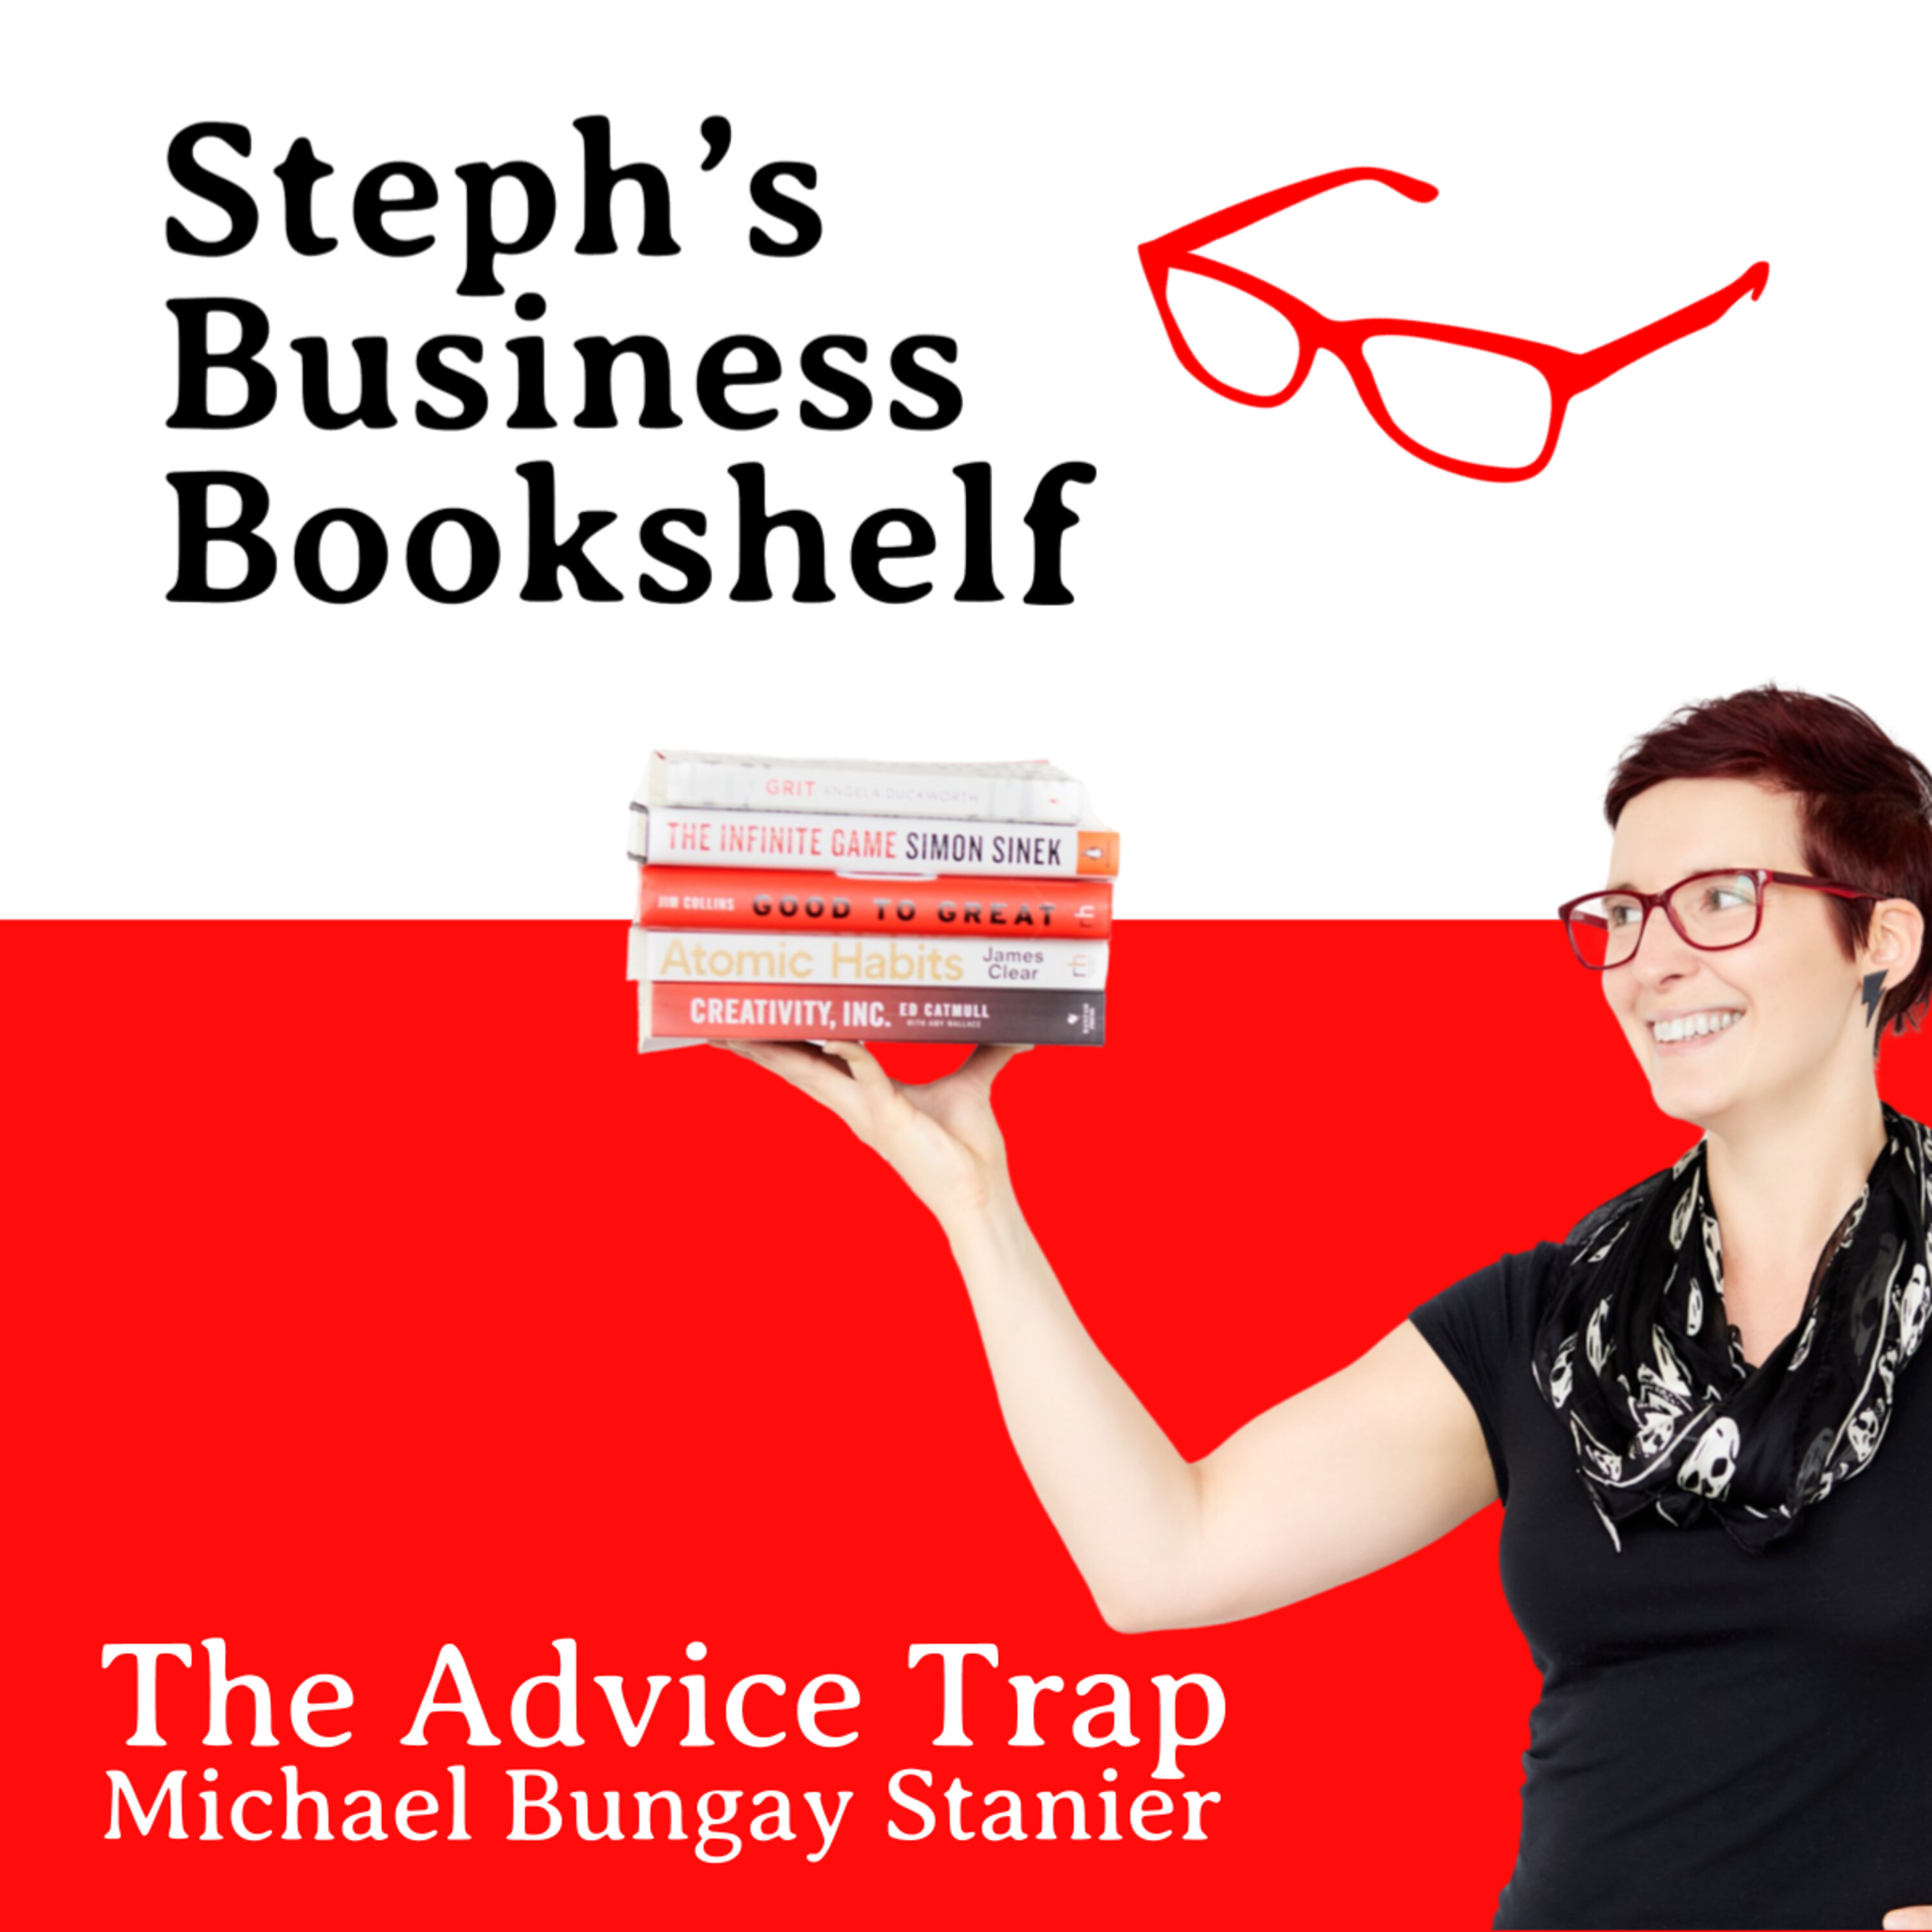 The Advice Trap Michael Bungay Stanier: How to save others from the perils of your good advice Image